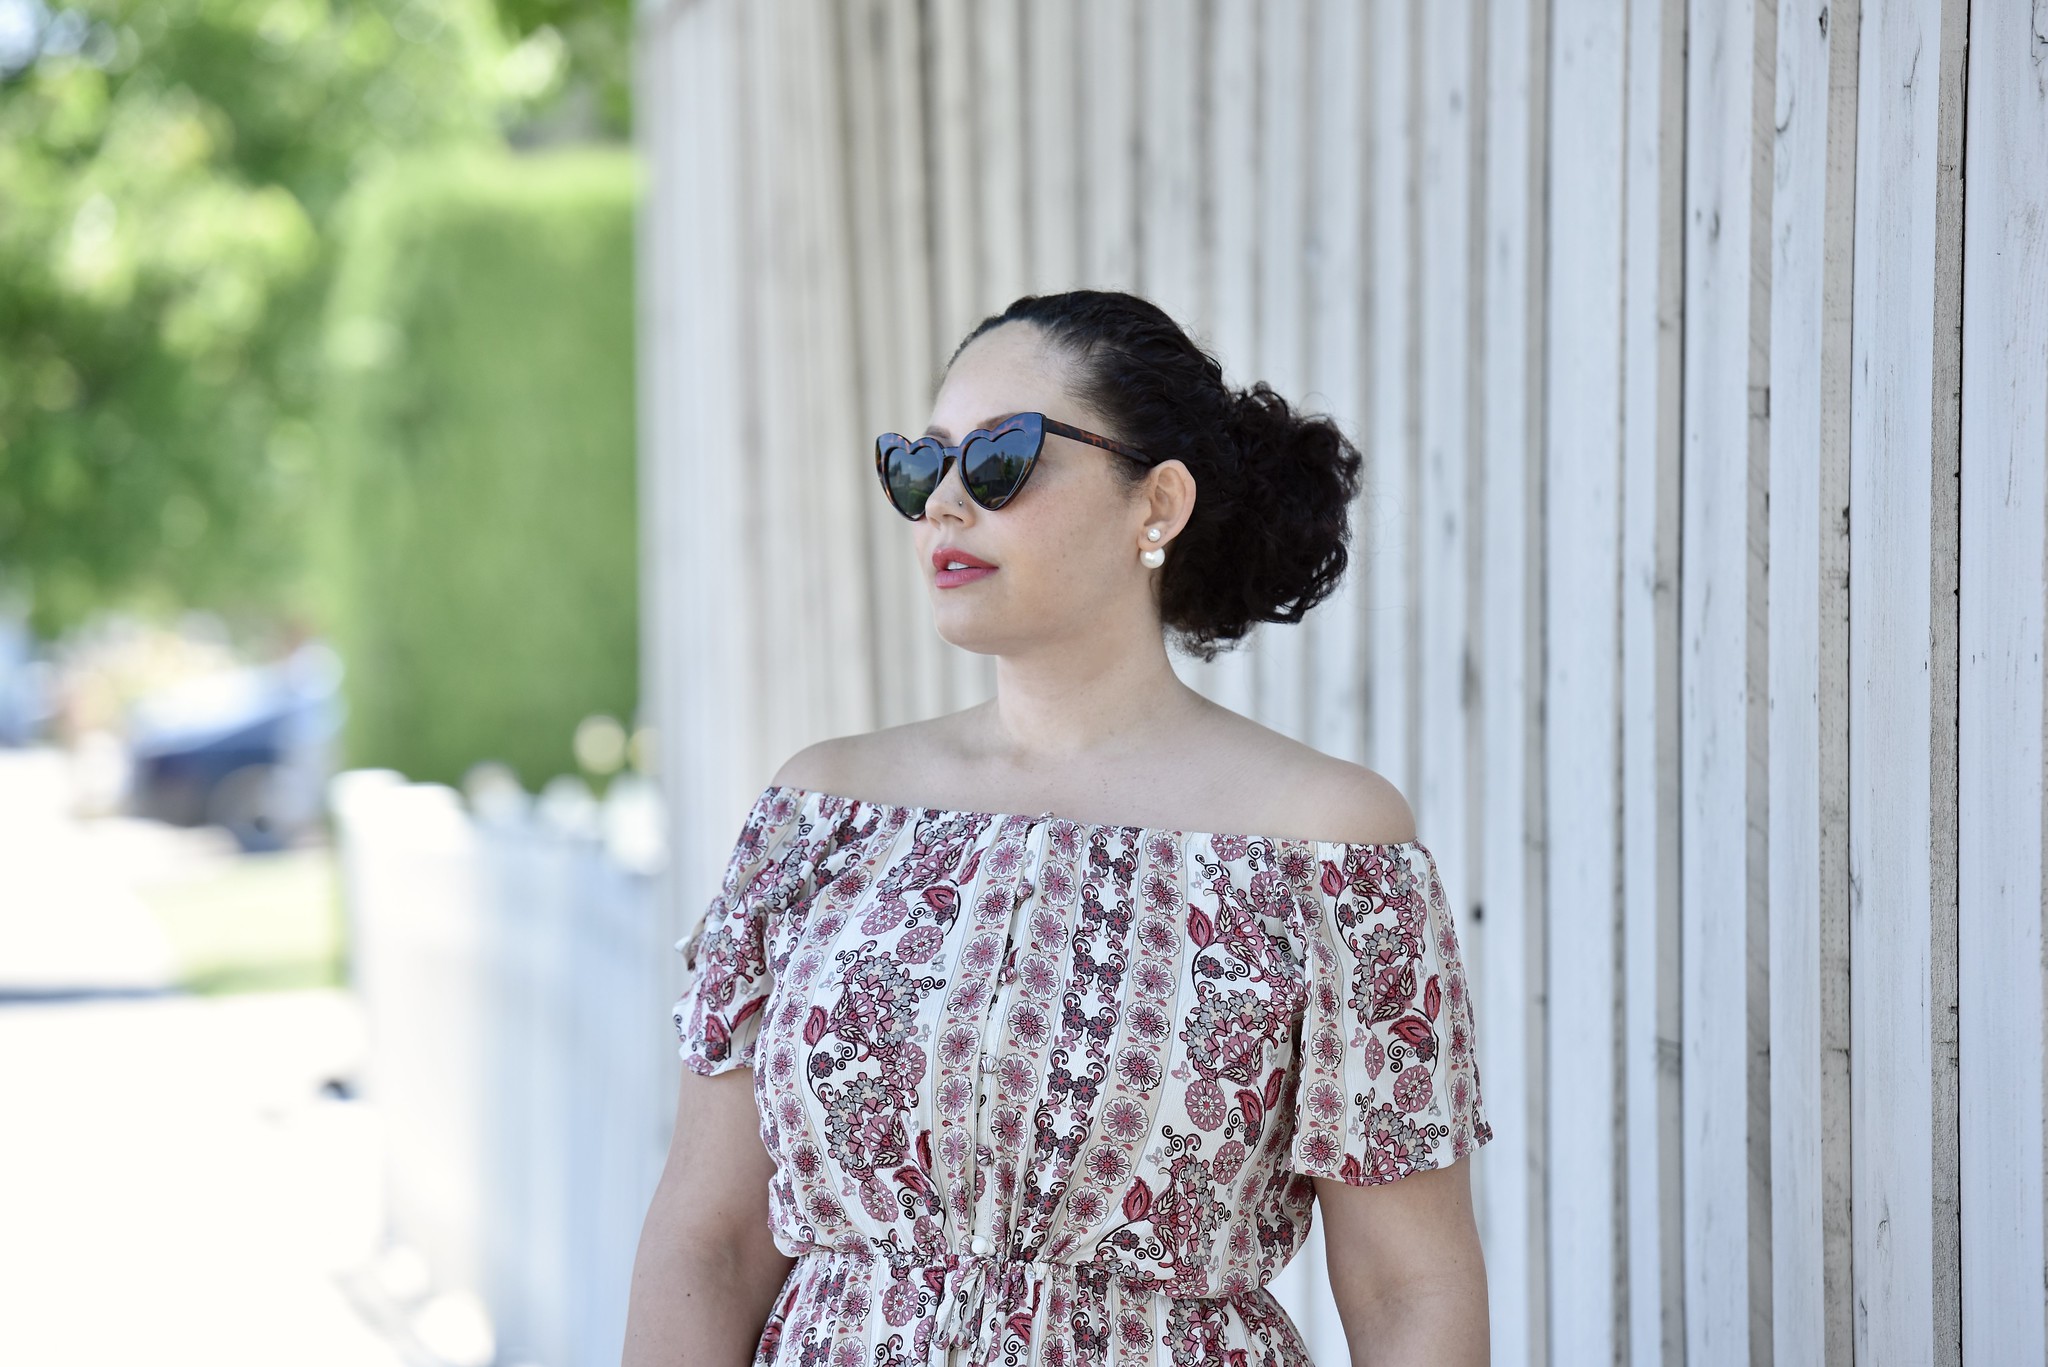 This $22 Dress Is A Must Have Via @GirlWithCurves #dress #budget #walmart #plussize #style #fashion #floral